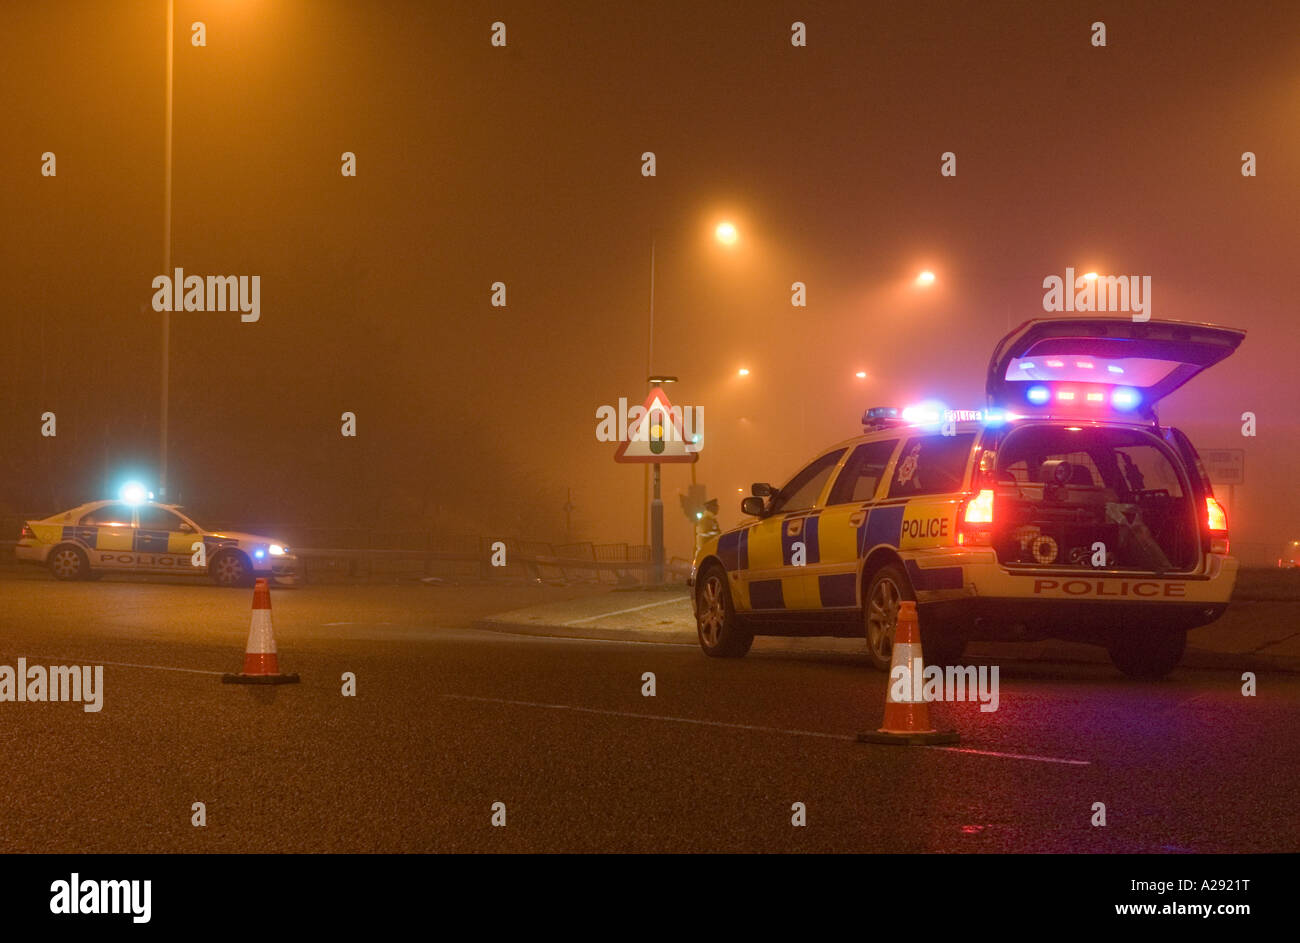 Night time incident with police cars in attendance Stock Photo